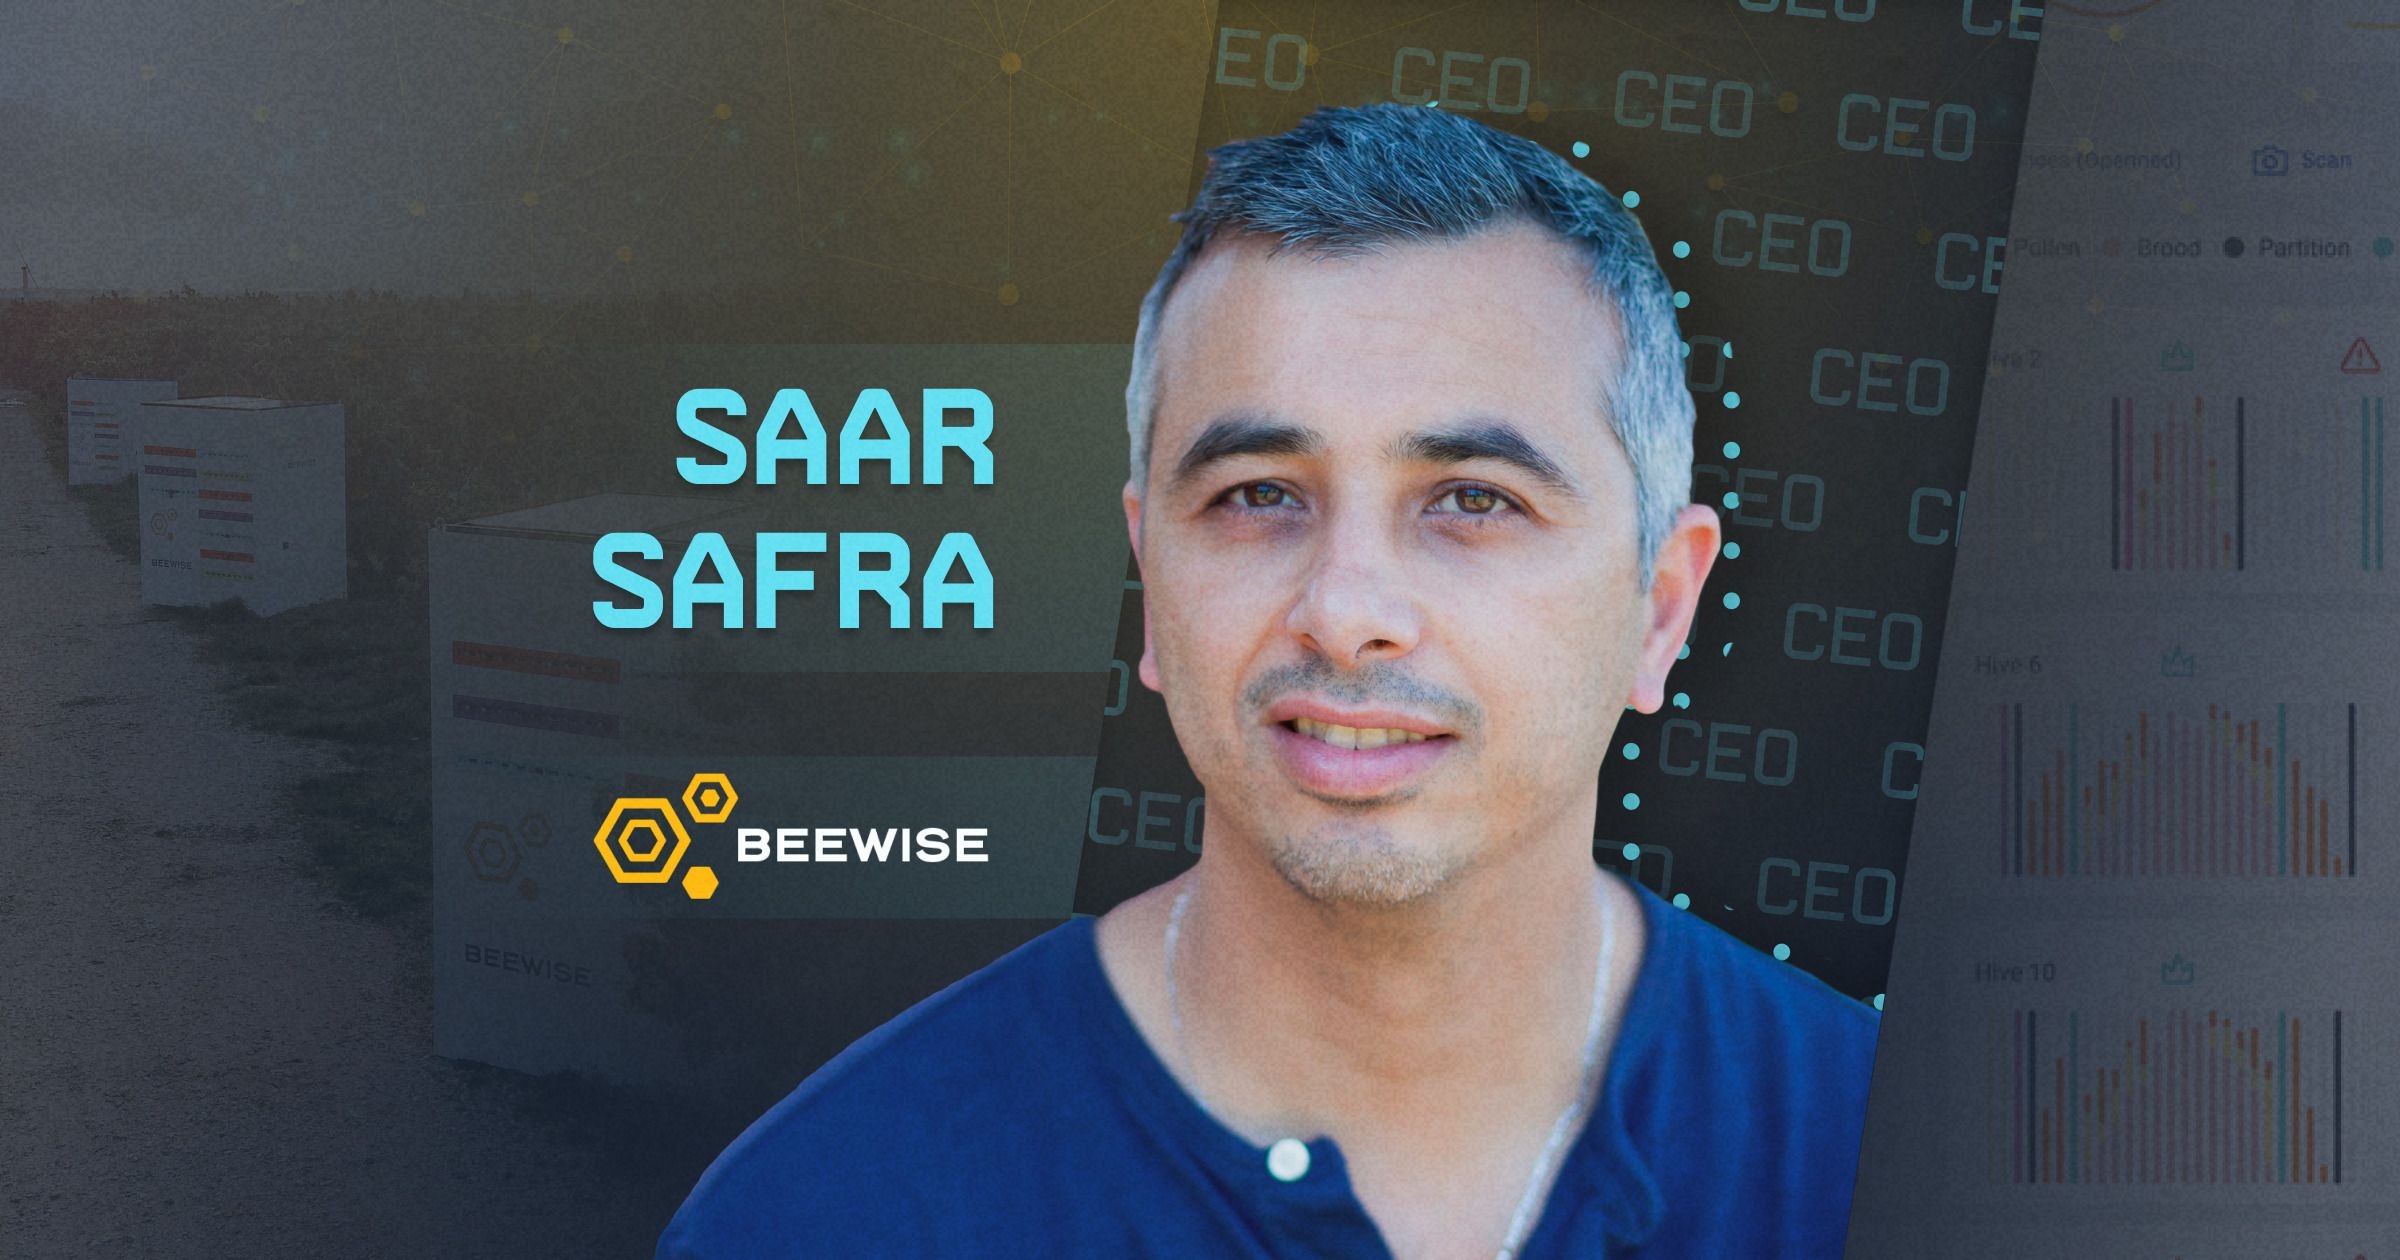 Beewise Co-Founder Saar Safra: Automating Beekeeping with Robotics for Alive and Thriving Bees